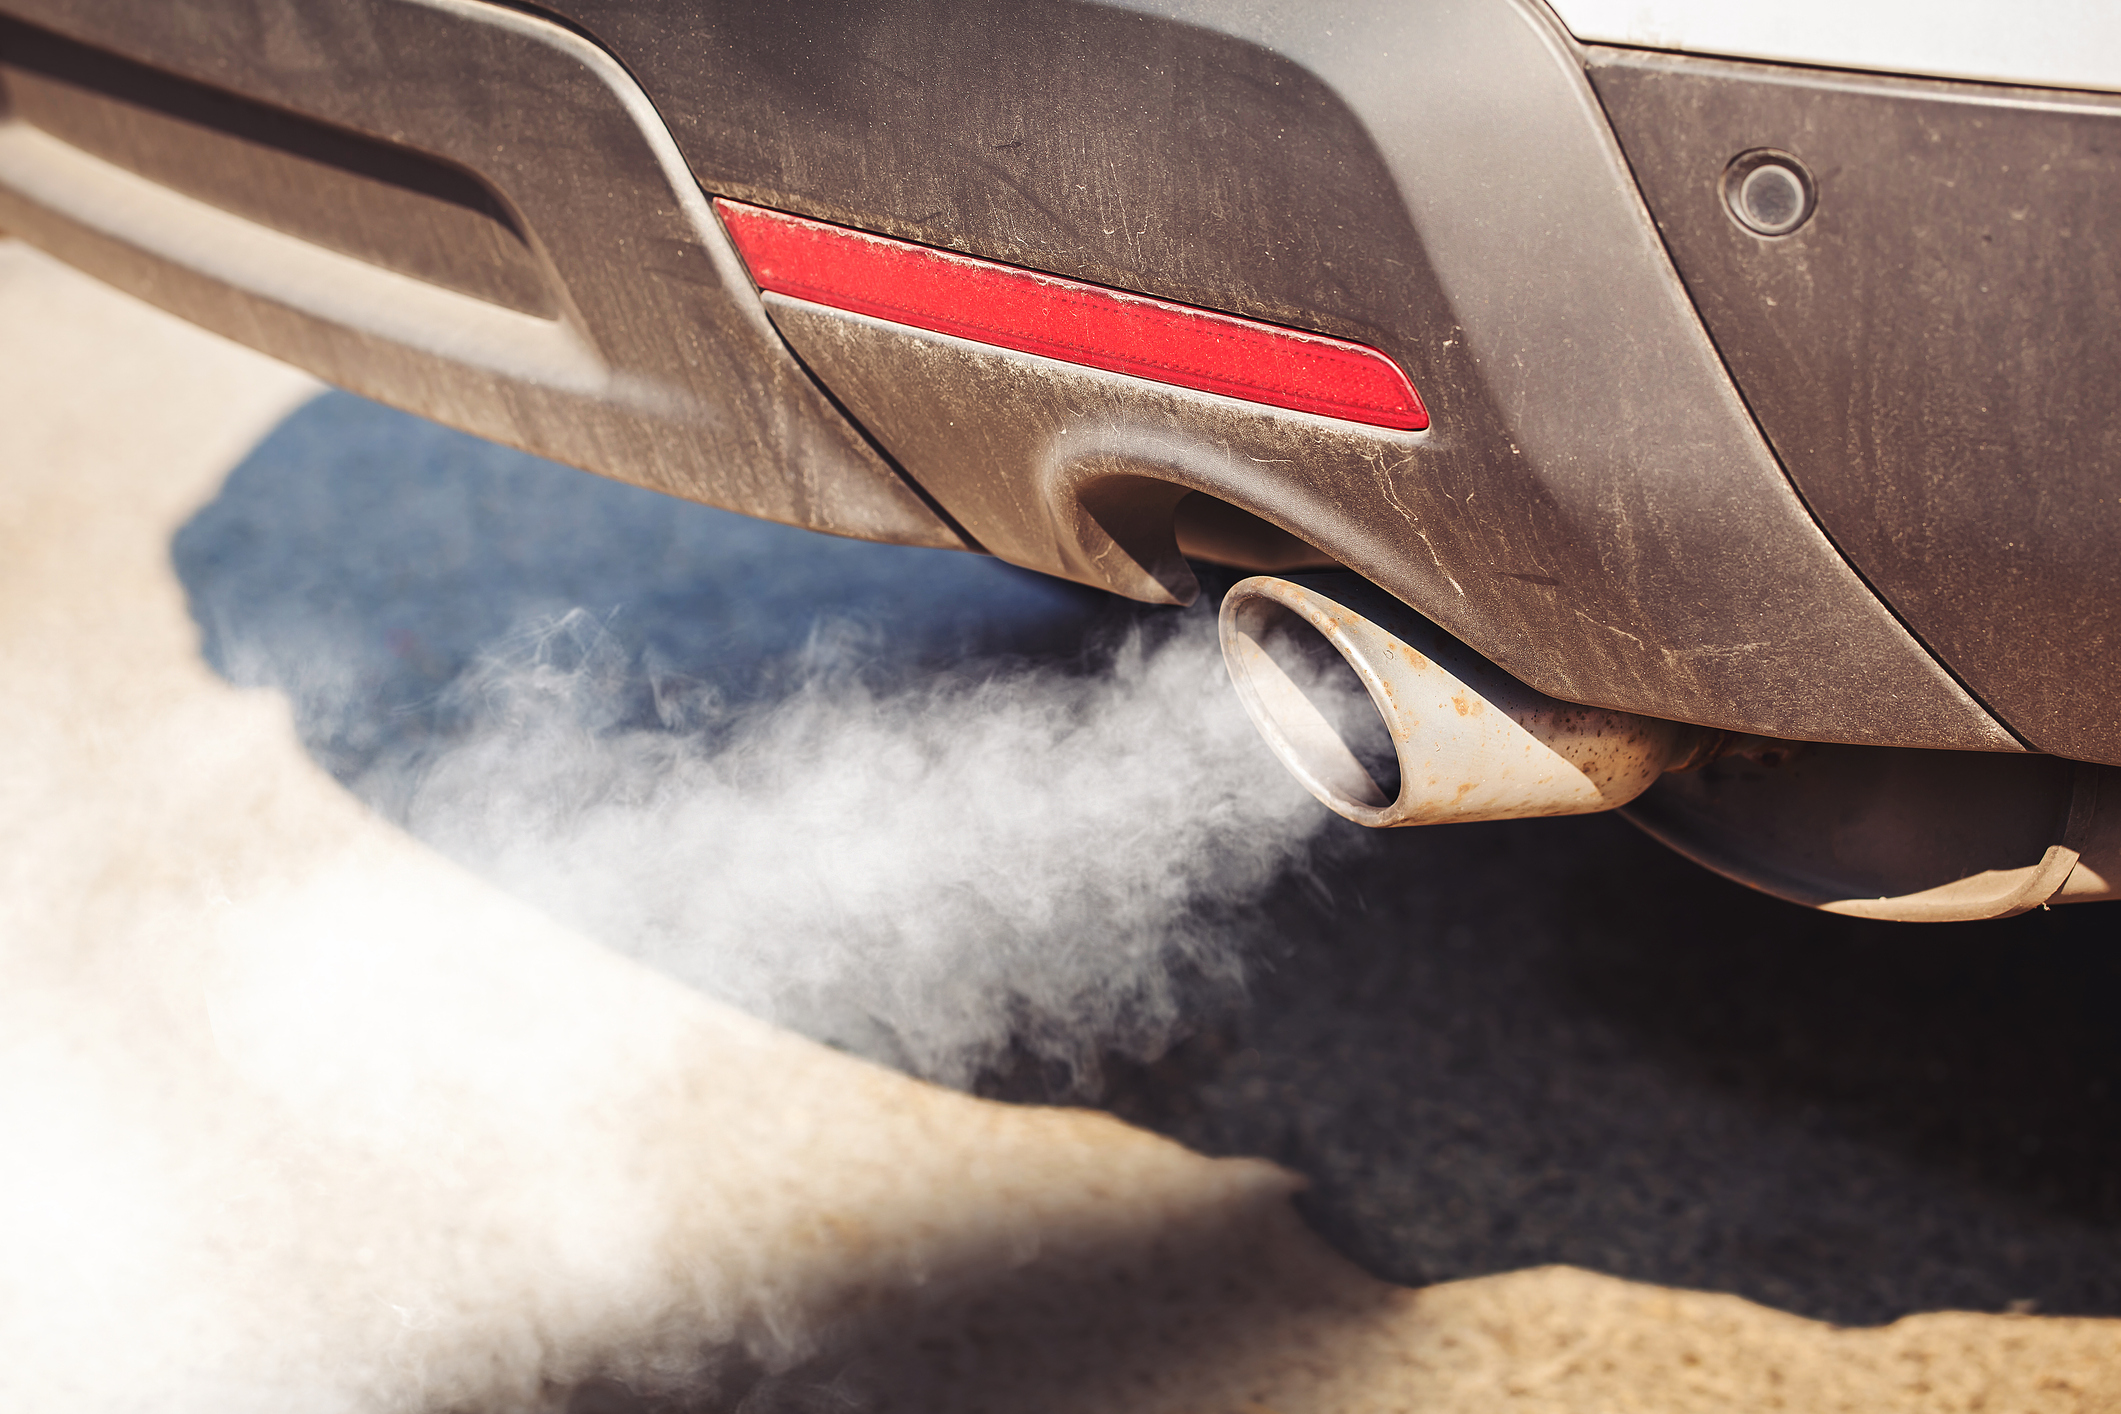 Switch off your engine, it's not hard: how to cut your fuel bill, clear ...